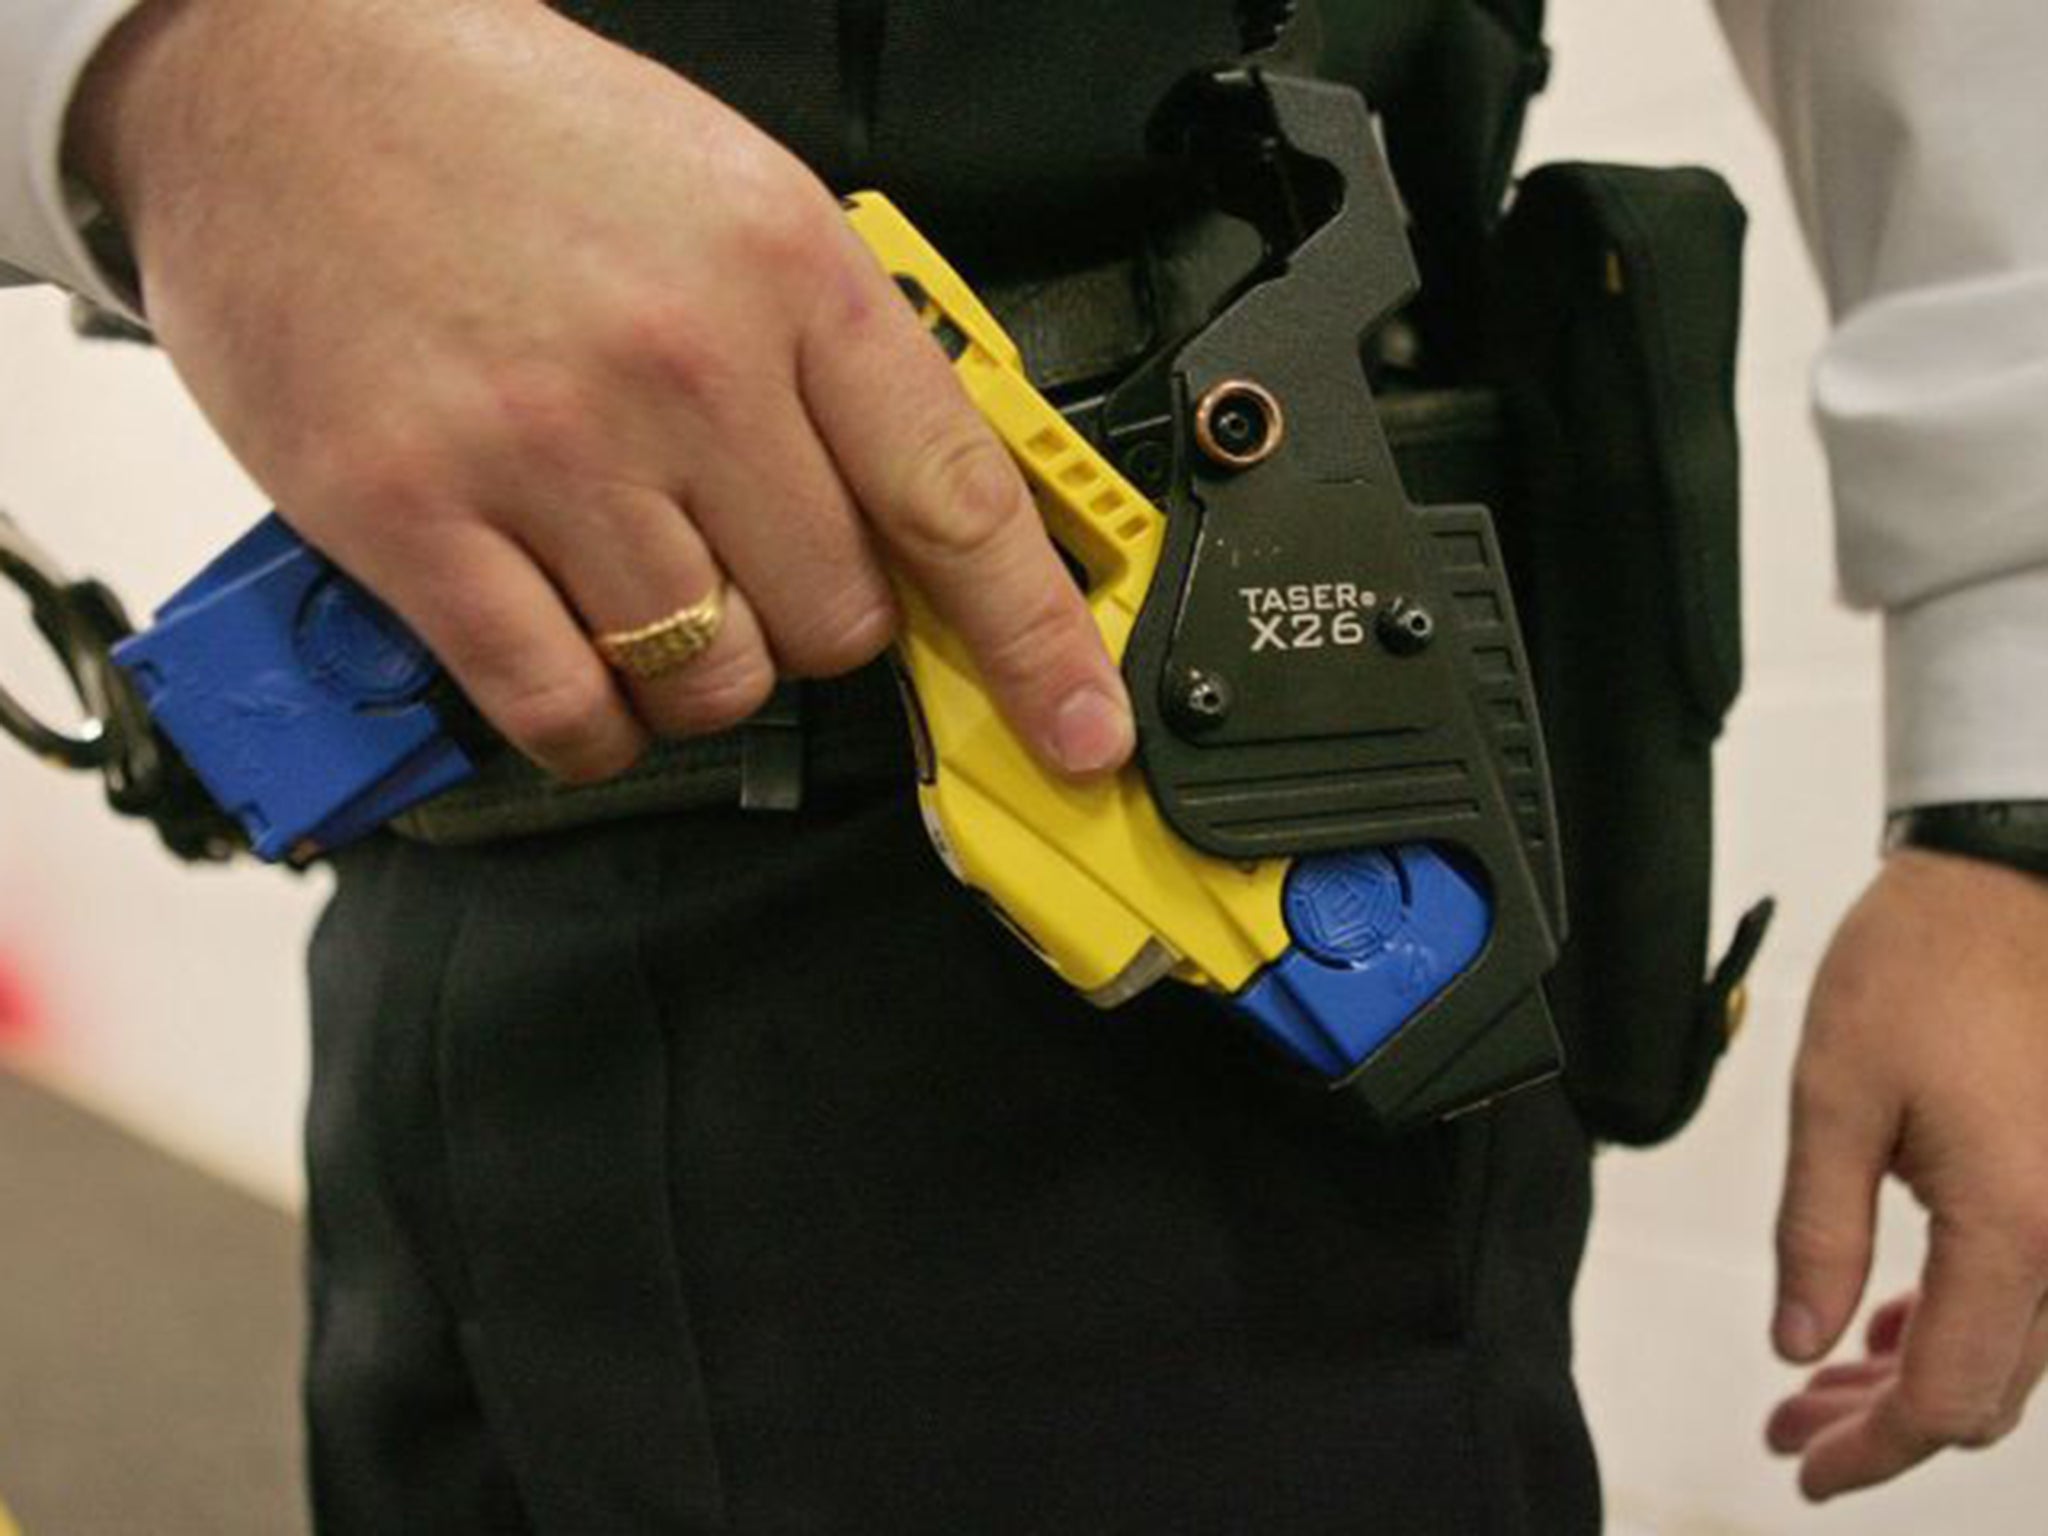 A police-issue Taser, the use of which increased between 2010 and 2014 from 6,238 incidents to 9,196